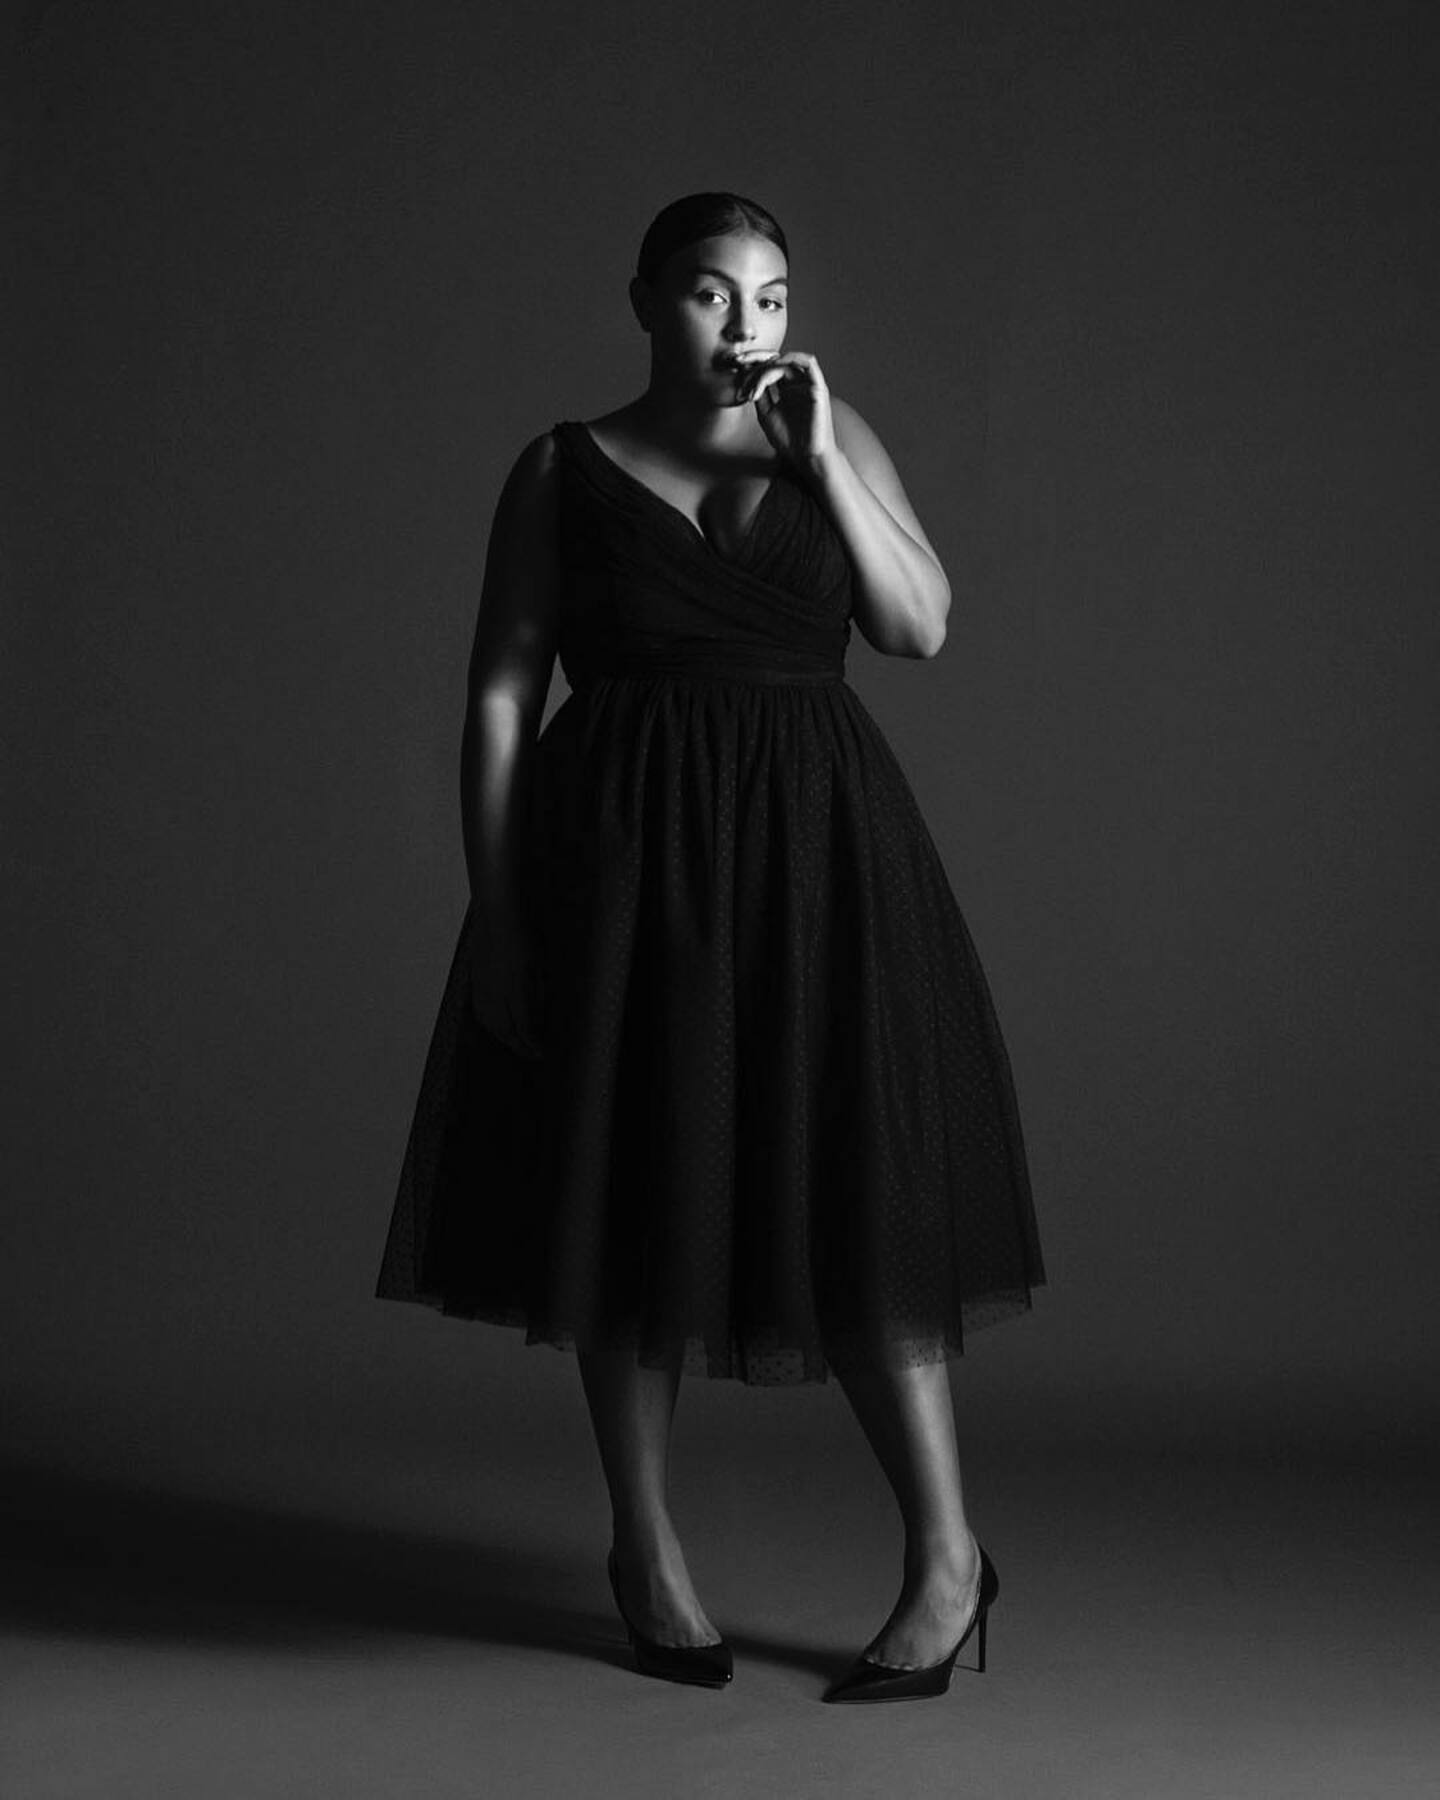 Well Hello Lane Bryant: This is what a size 20 looks like (Part Two) - THE  IDENTITY OF SHE